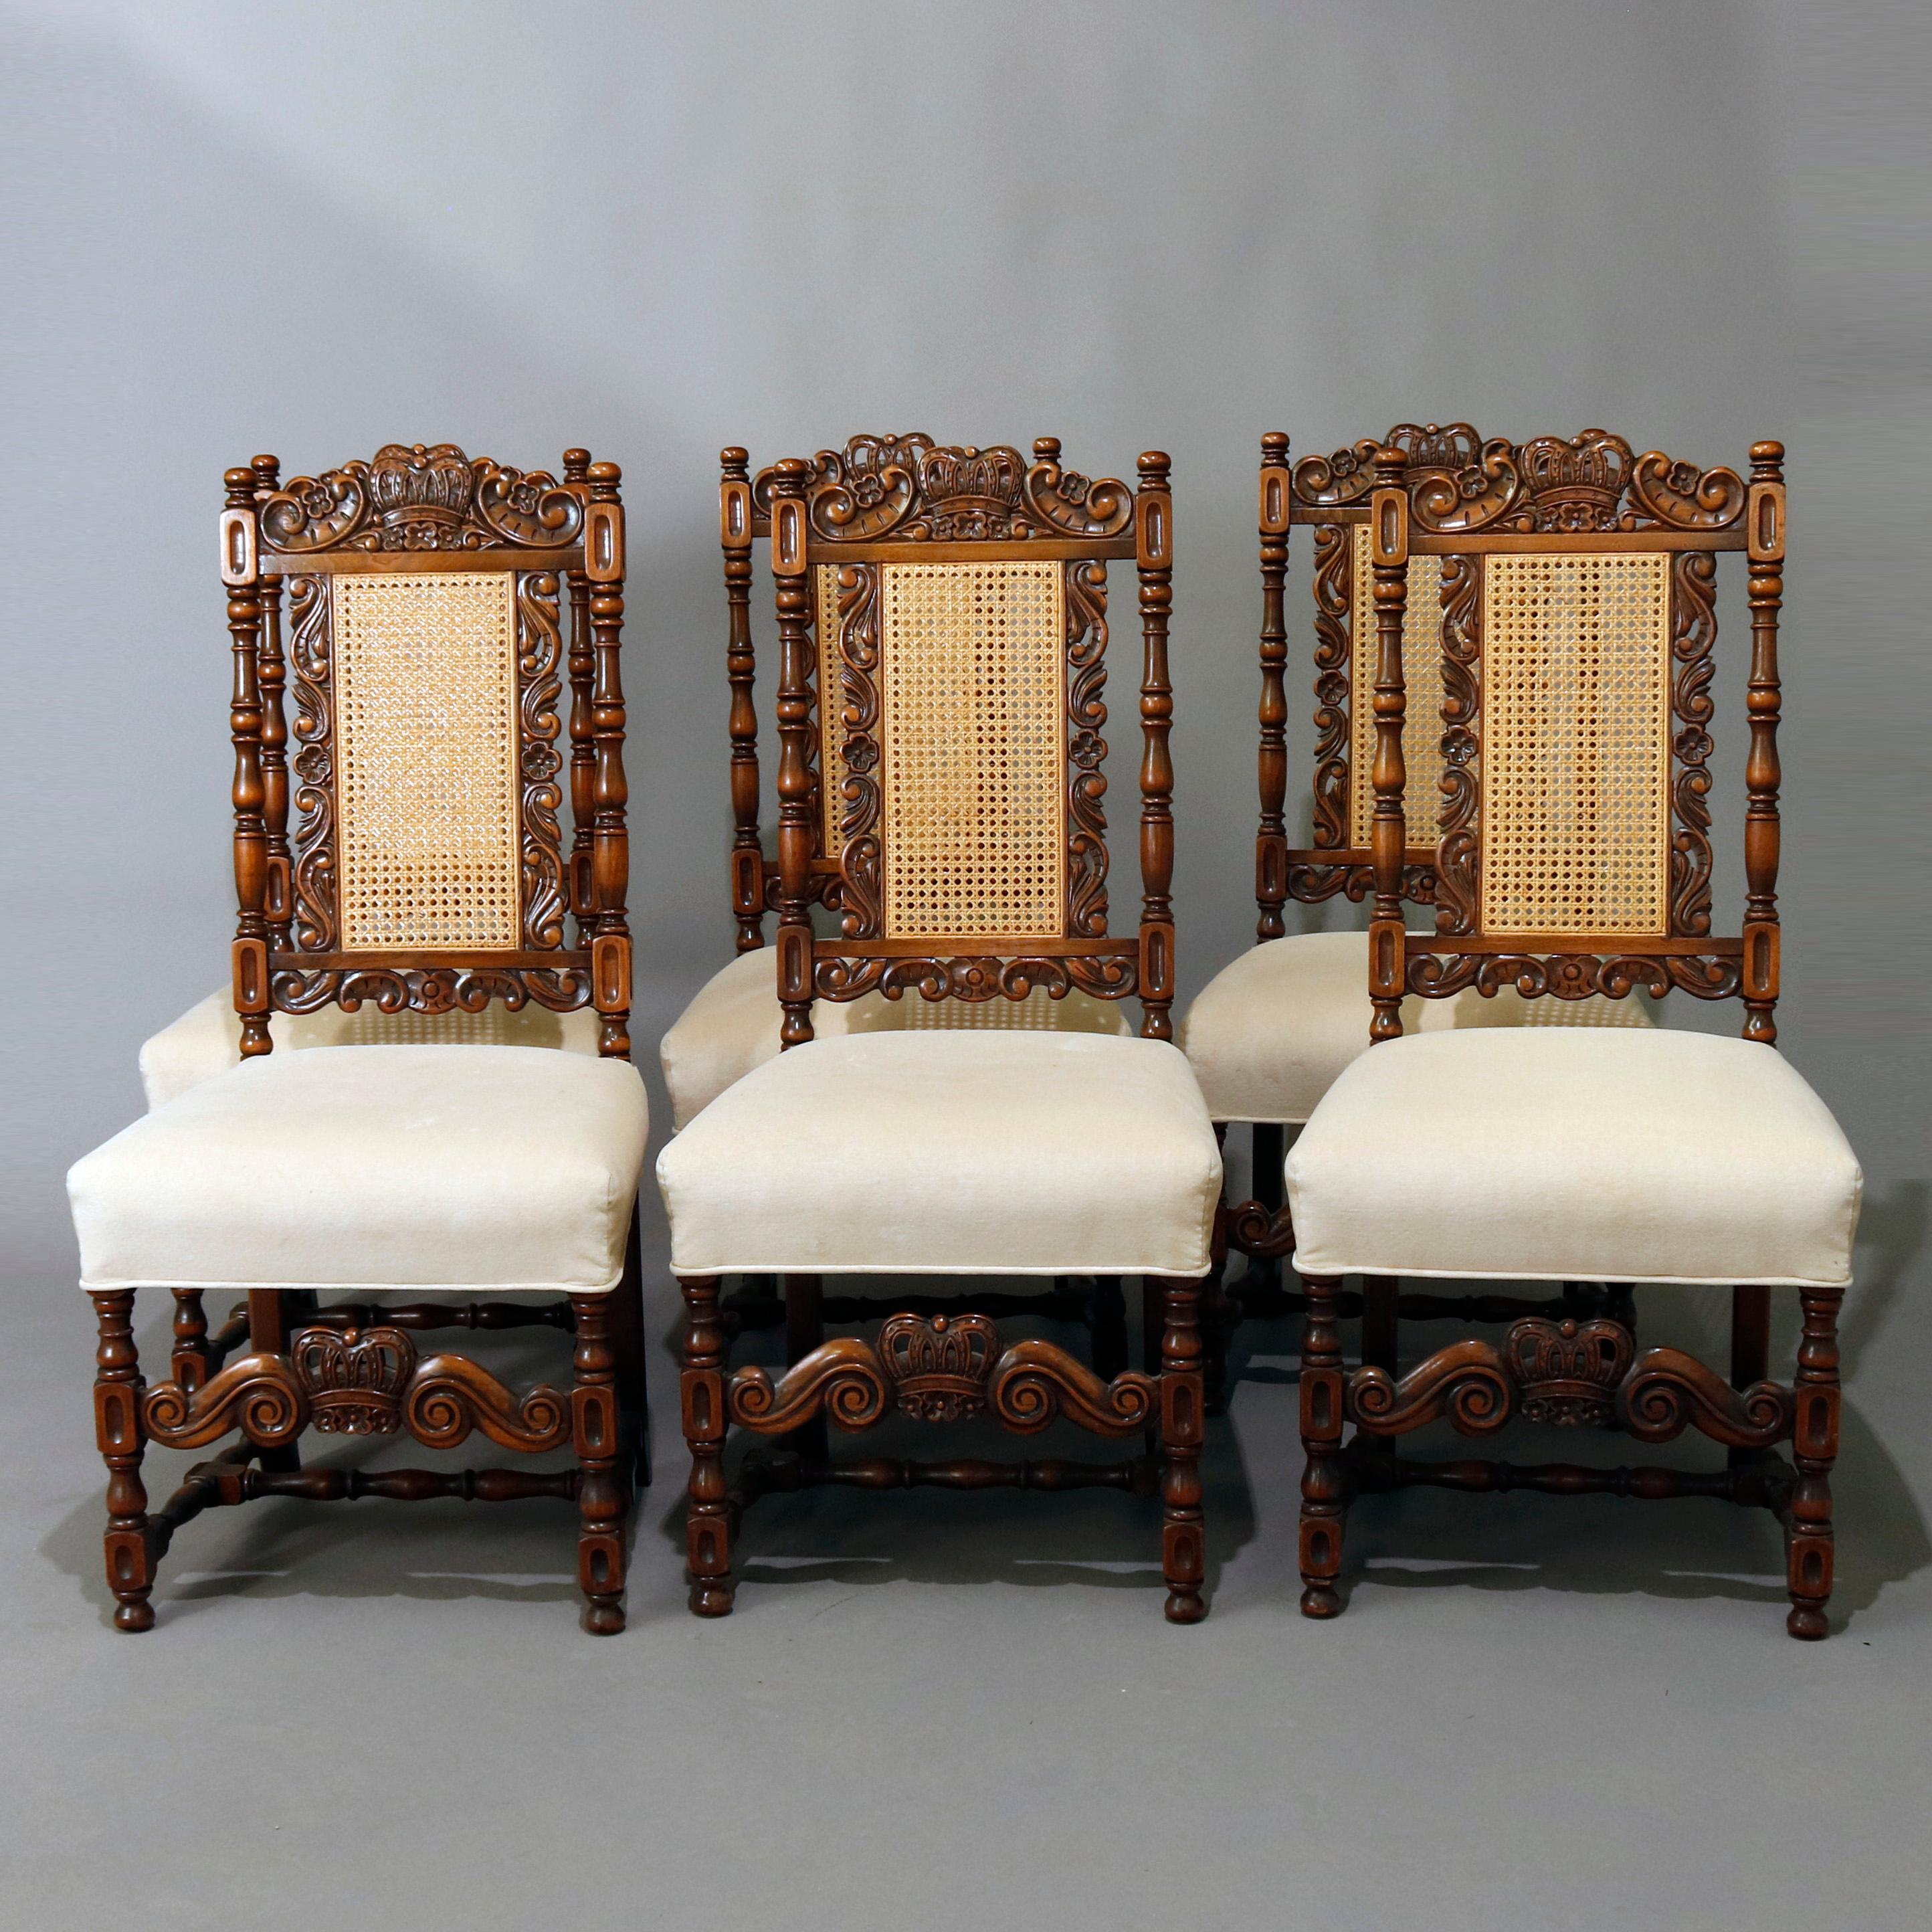 A vintage set of six Gothic style dining chairs by Kittinger feature heavily carved walnut frames with crown crests flanked by gadroon and foliate elements surmounting pressed cane backs with turned columns and upholstered seats raised on turned